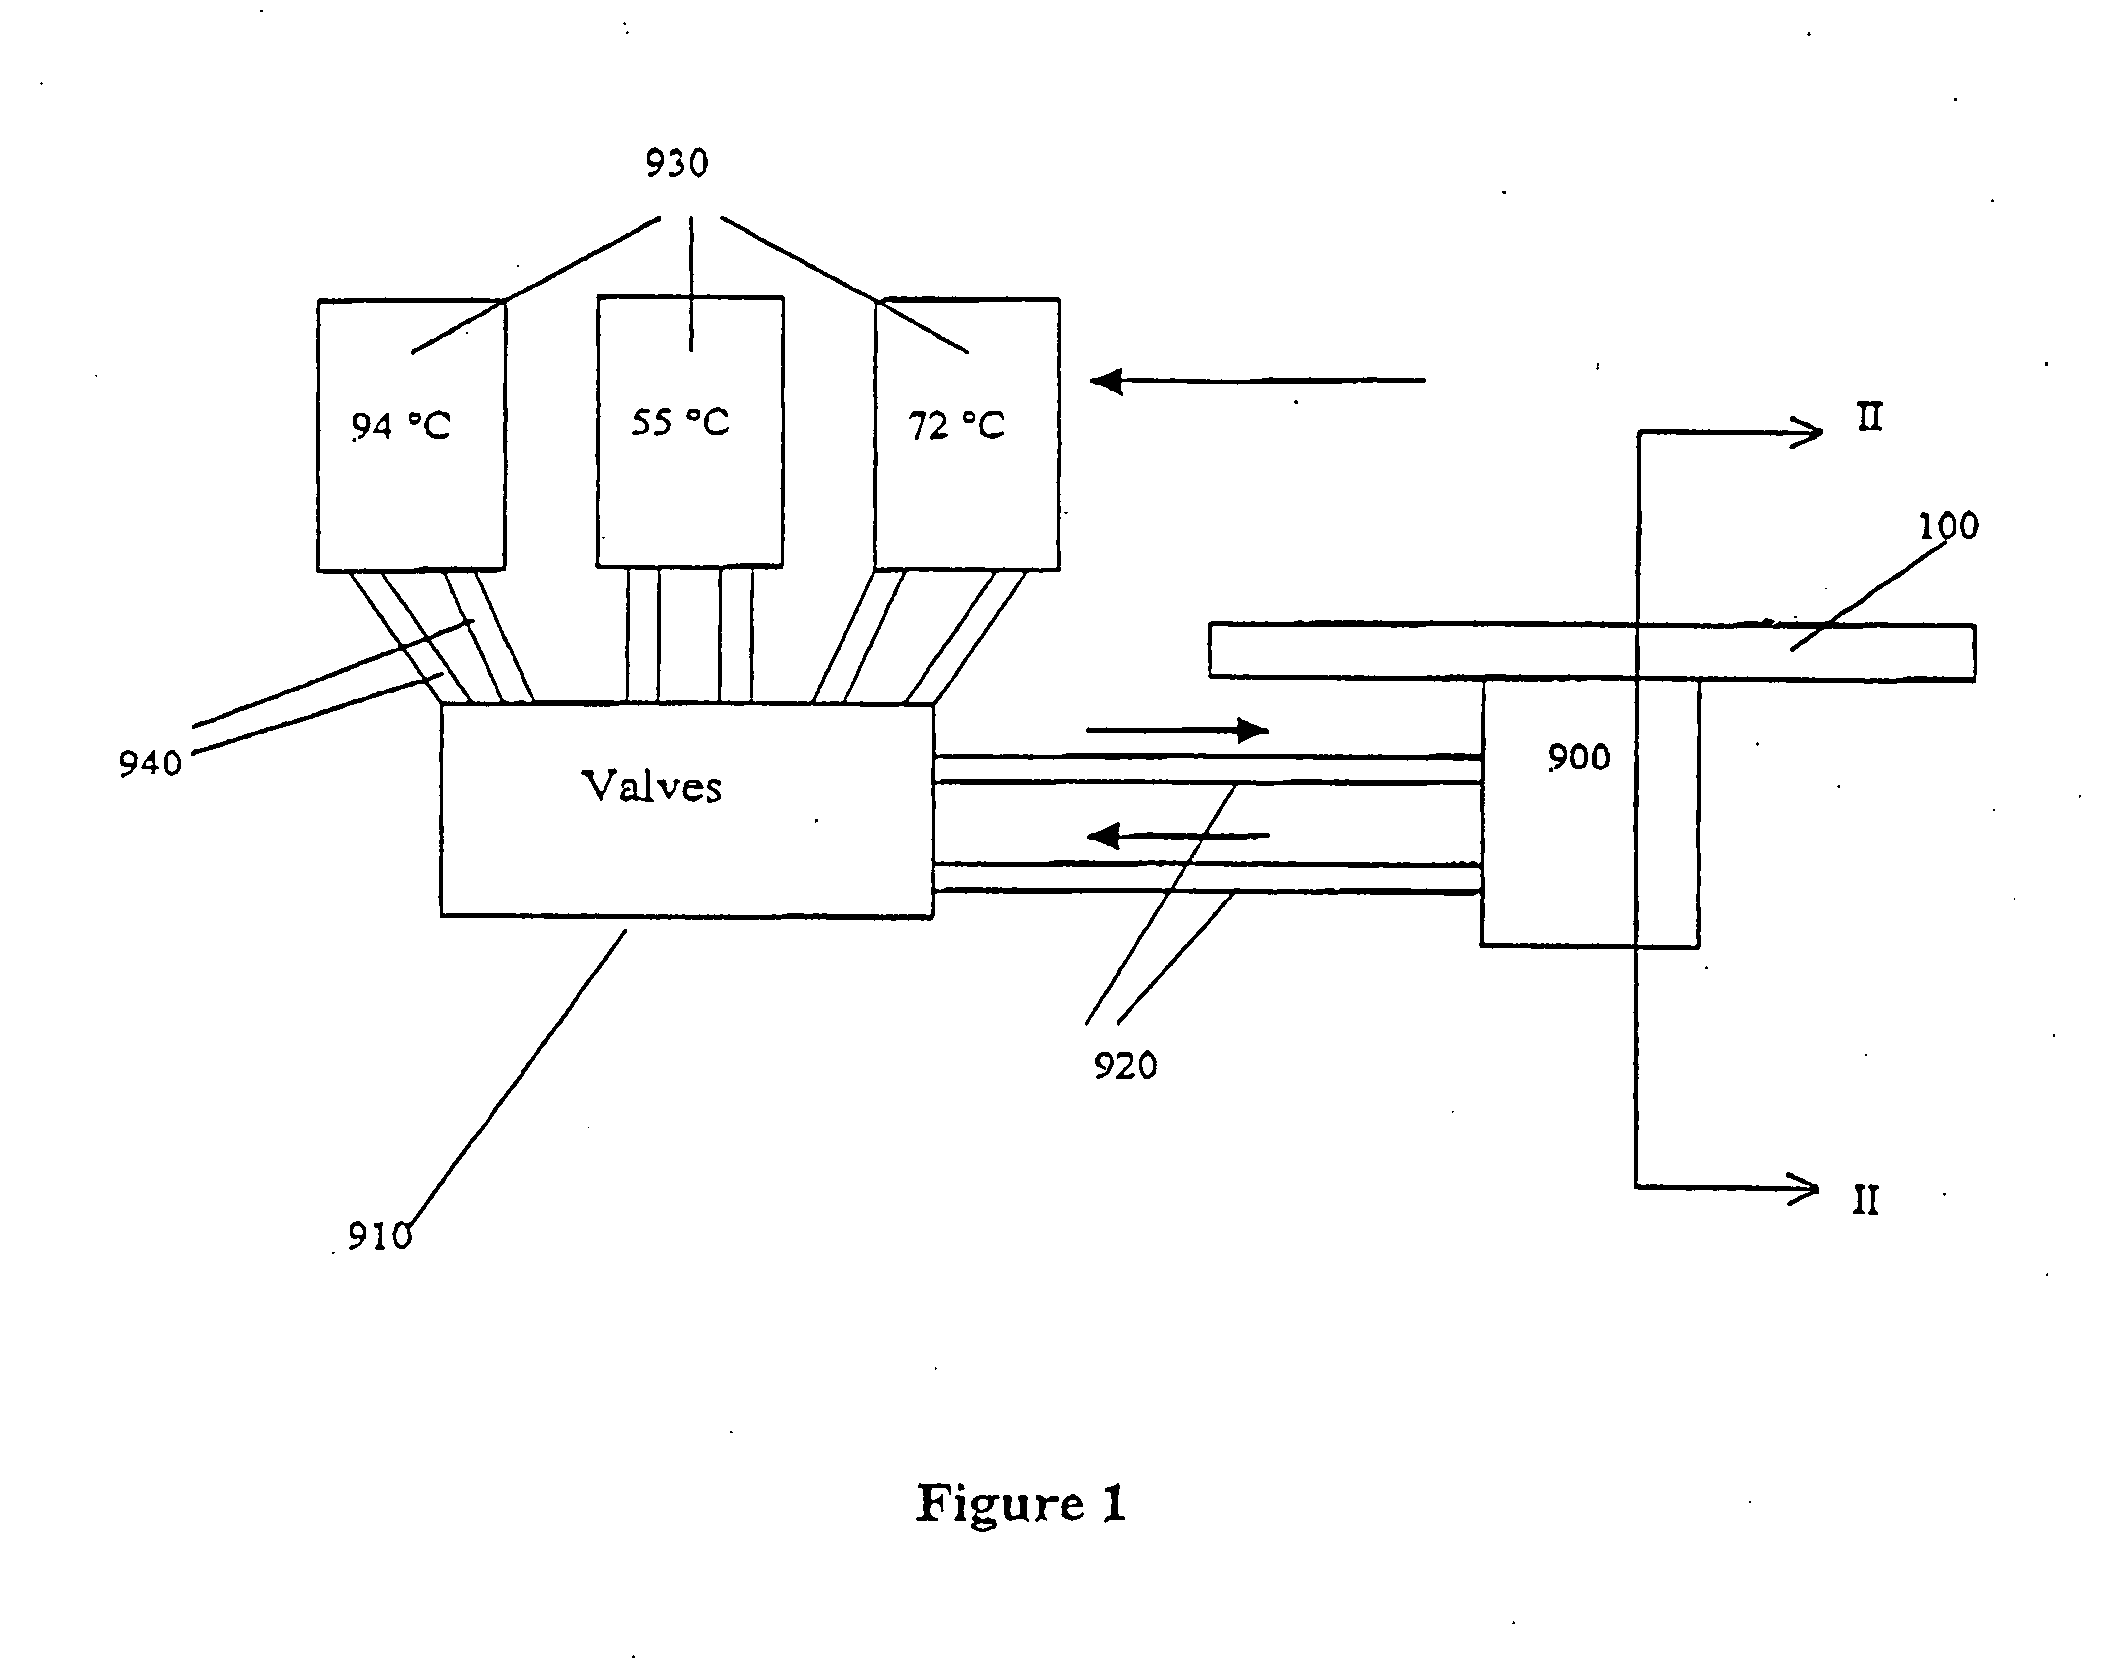 Method for carrying out a biochemical protocol in continuous flow in a microreactor